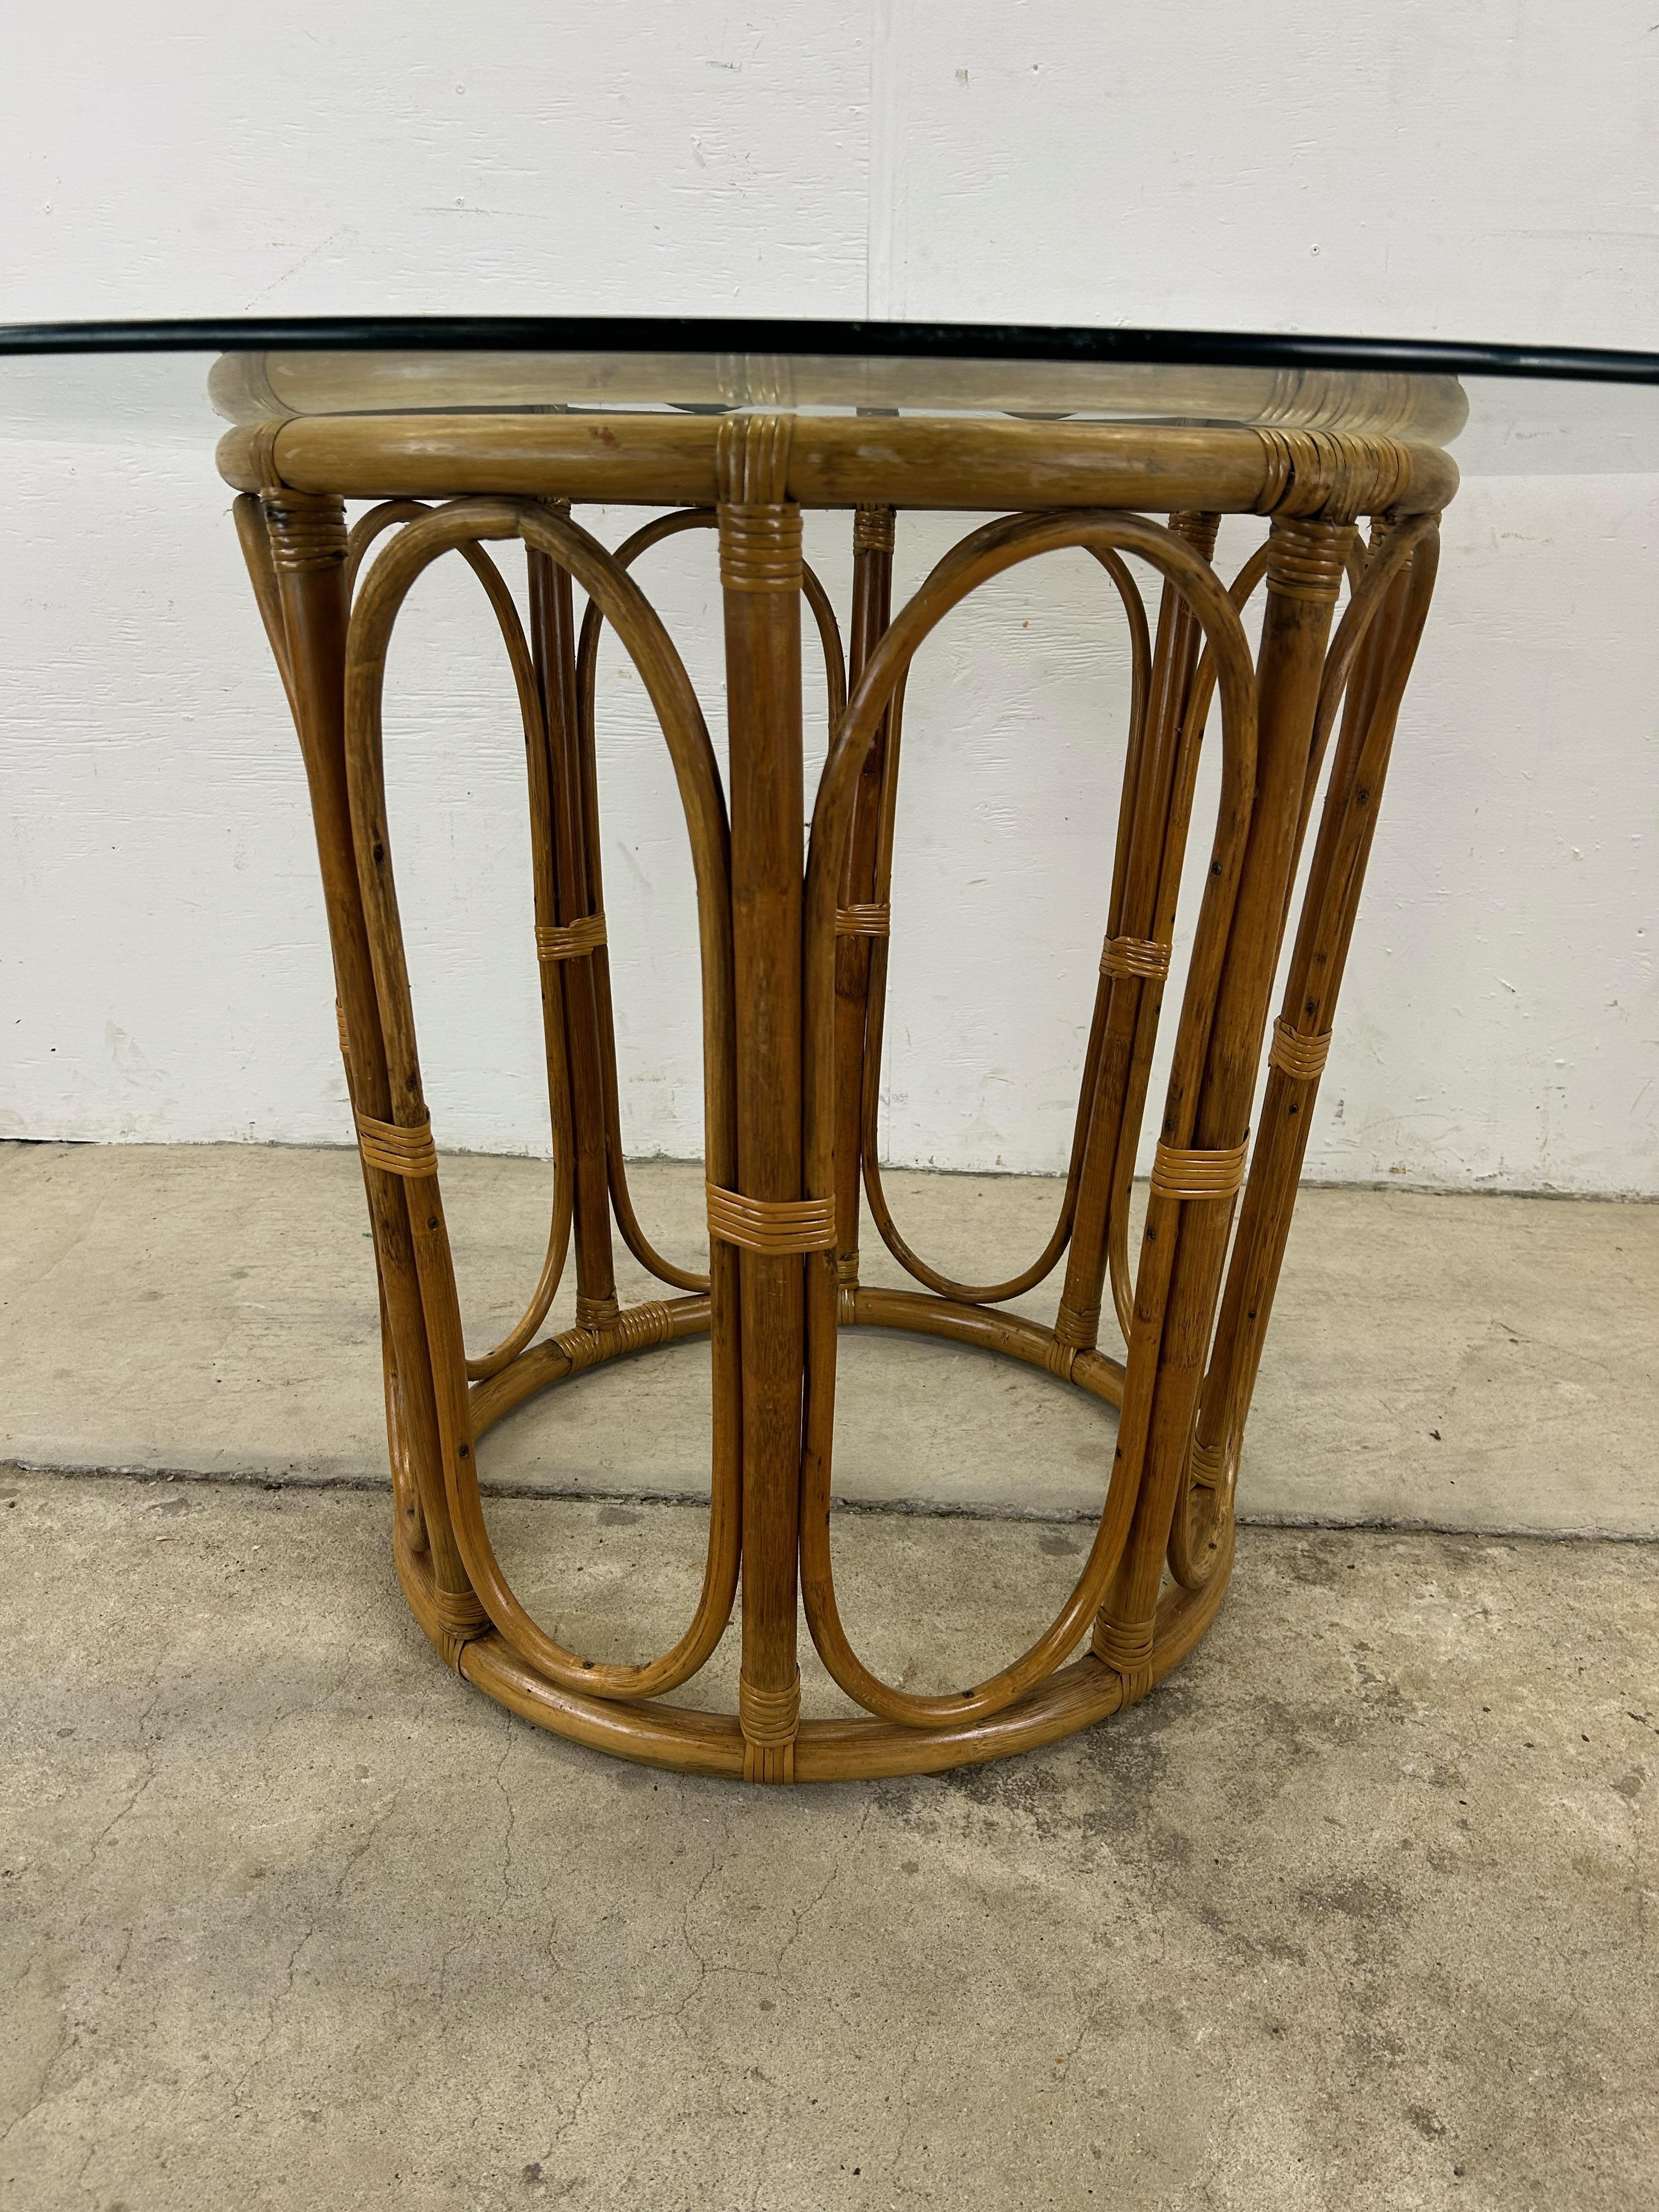 20th Century Vintage Glass Top Dining Table with Rattan Pedestal Base For Sale